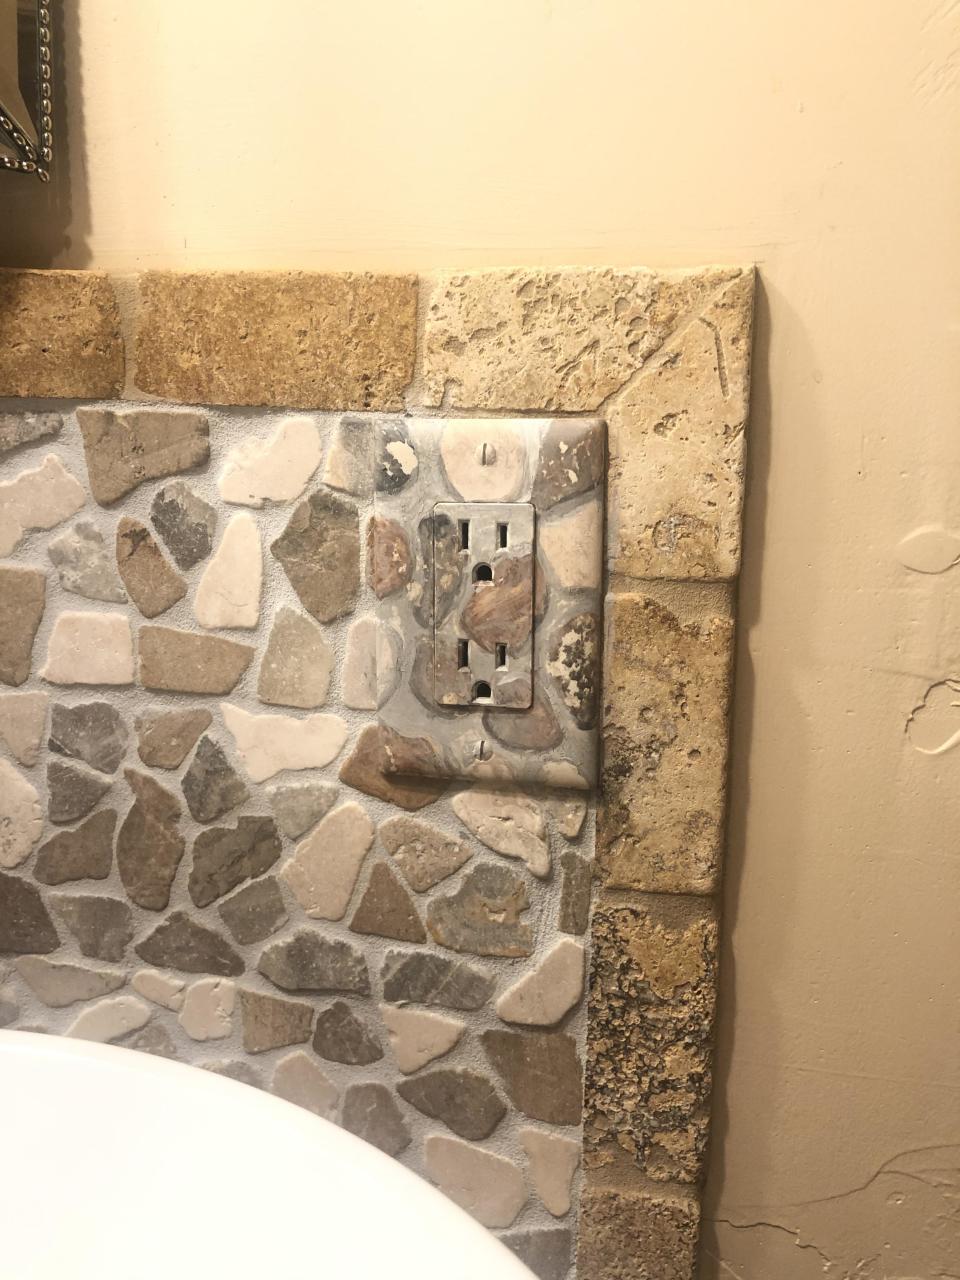 outlet painted like the stone backdrop